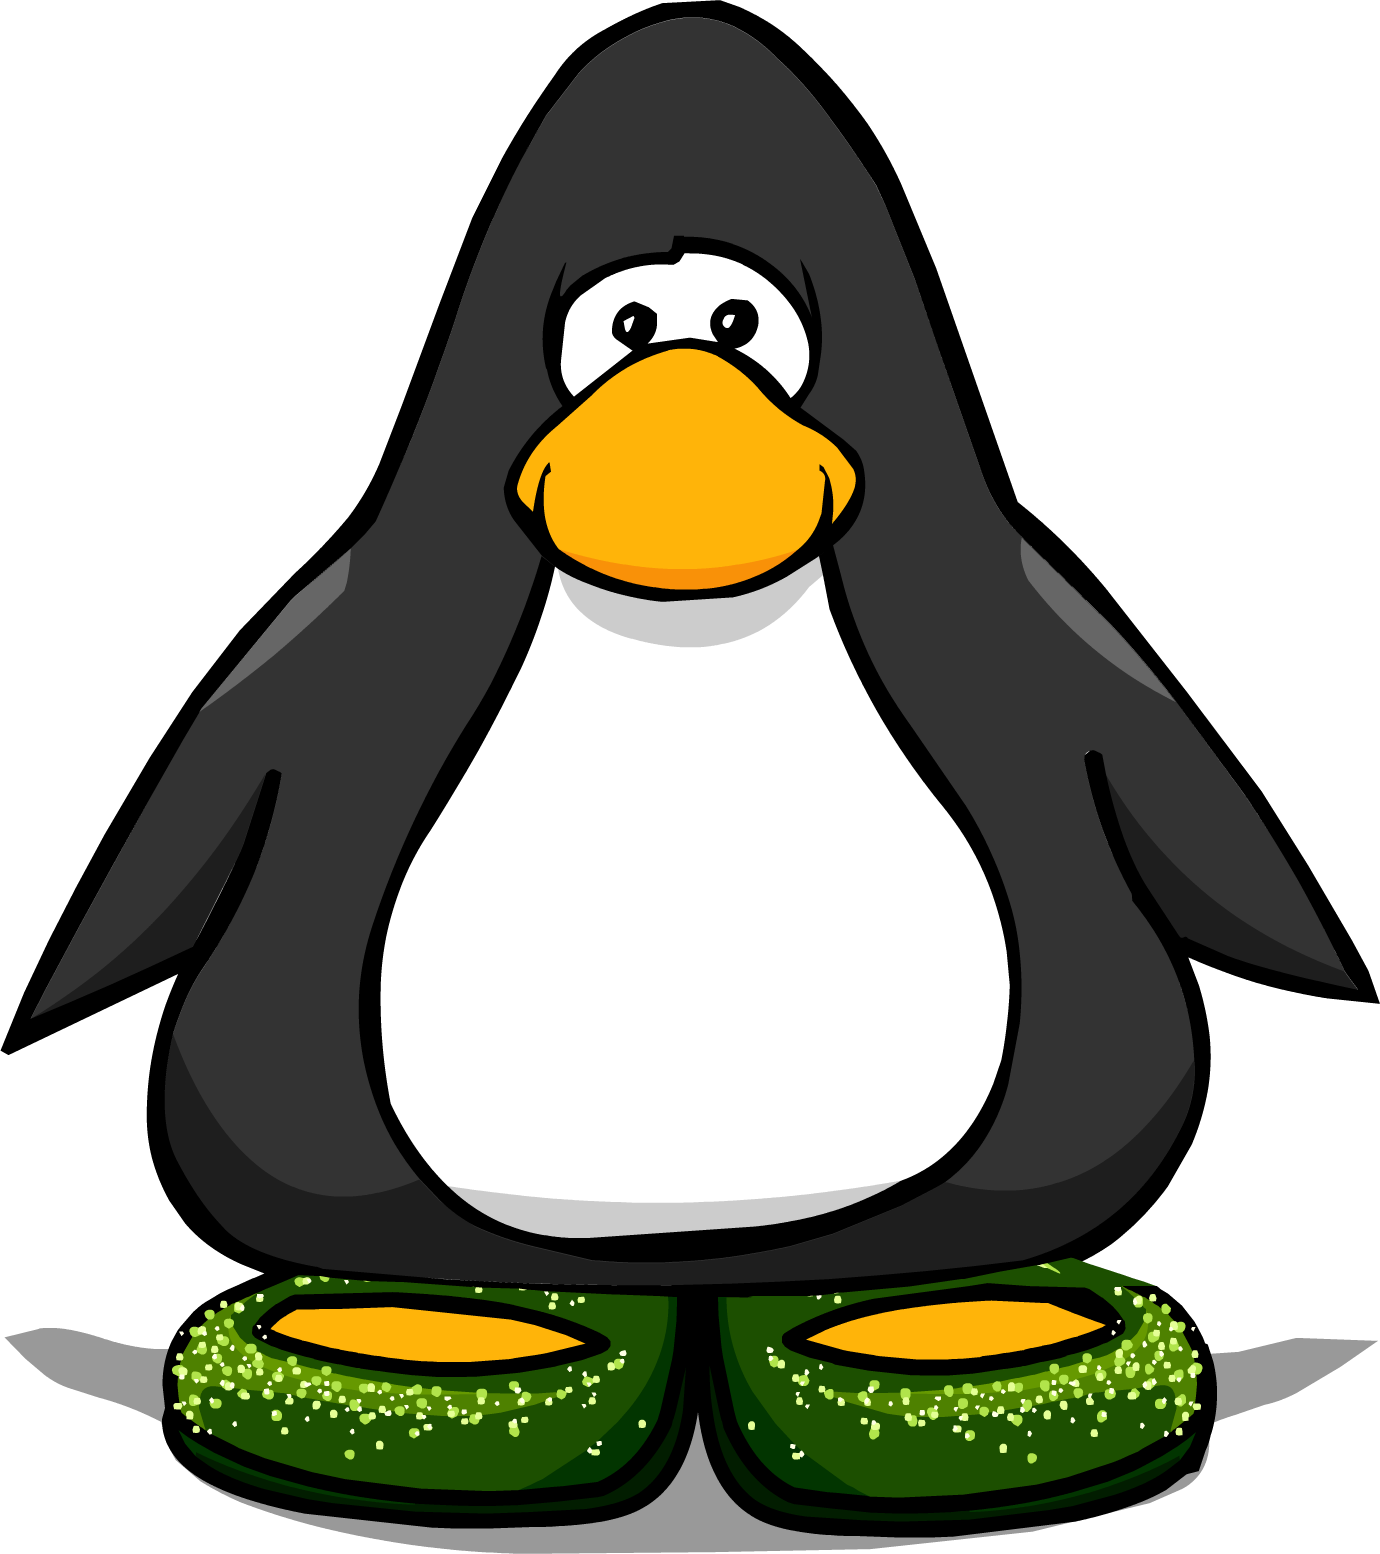 Sparkly Emerald Shoes From A Player Card - Club Penguin Bling Bling Necklace (1380x1554)